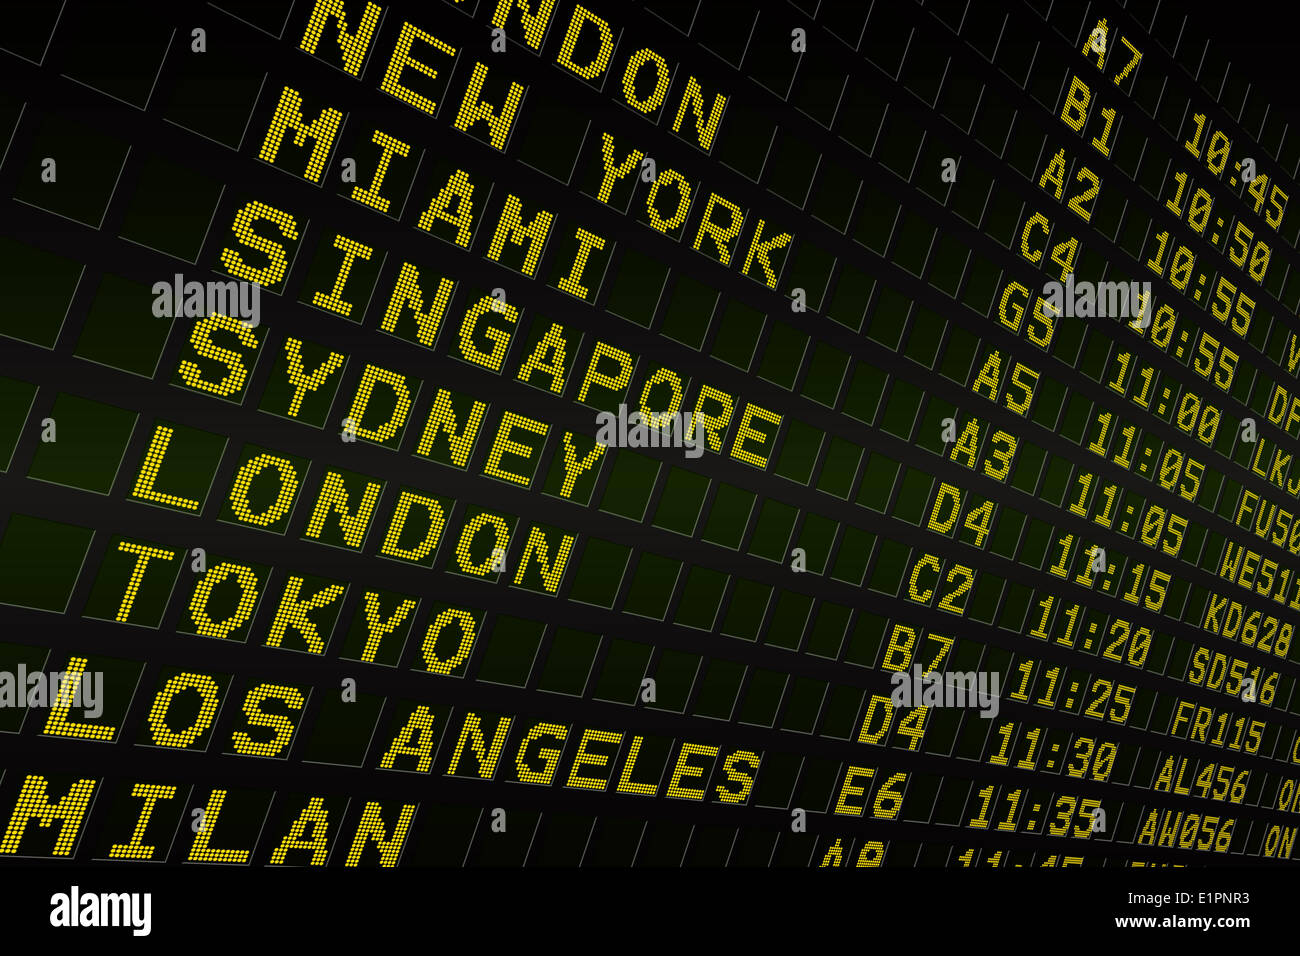 Black airport departures board with yellow text Stock Photo